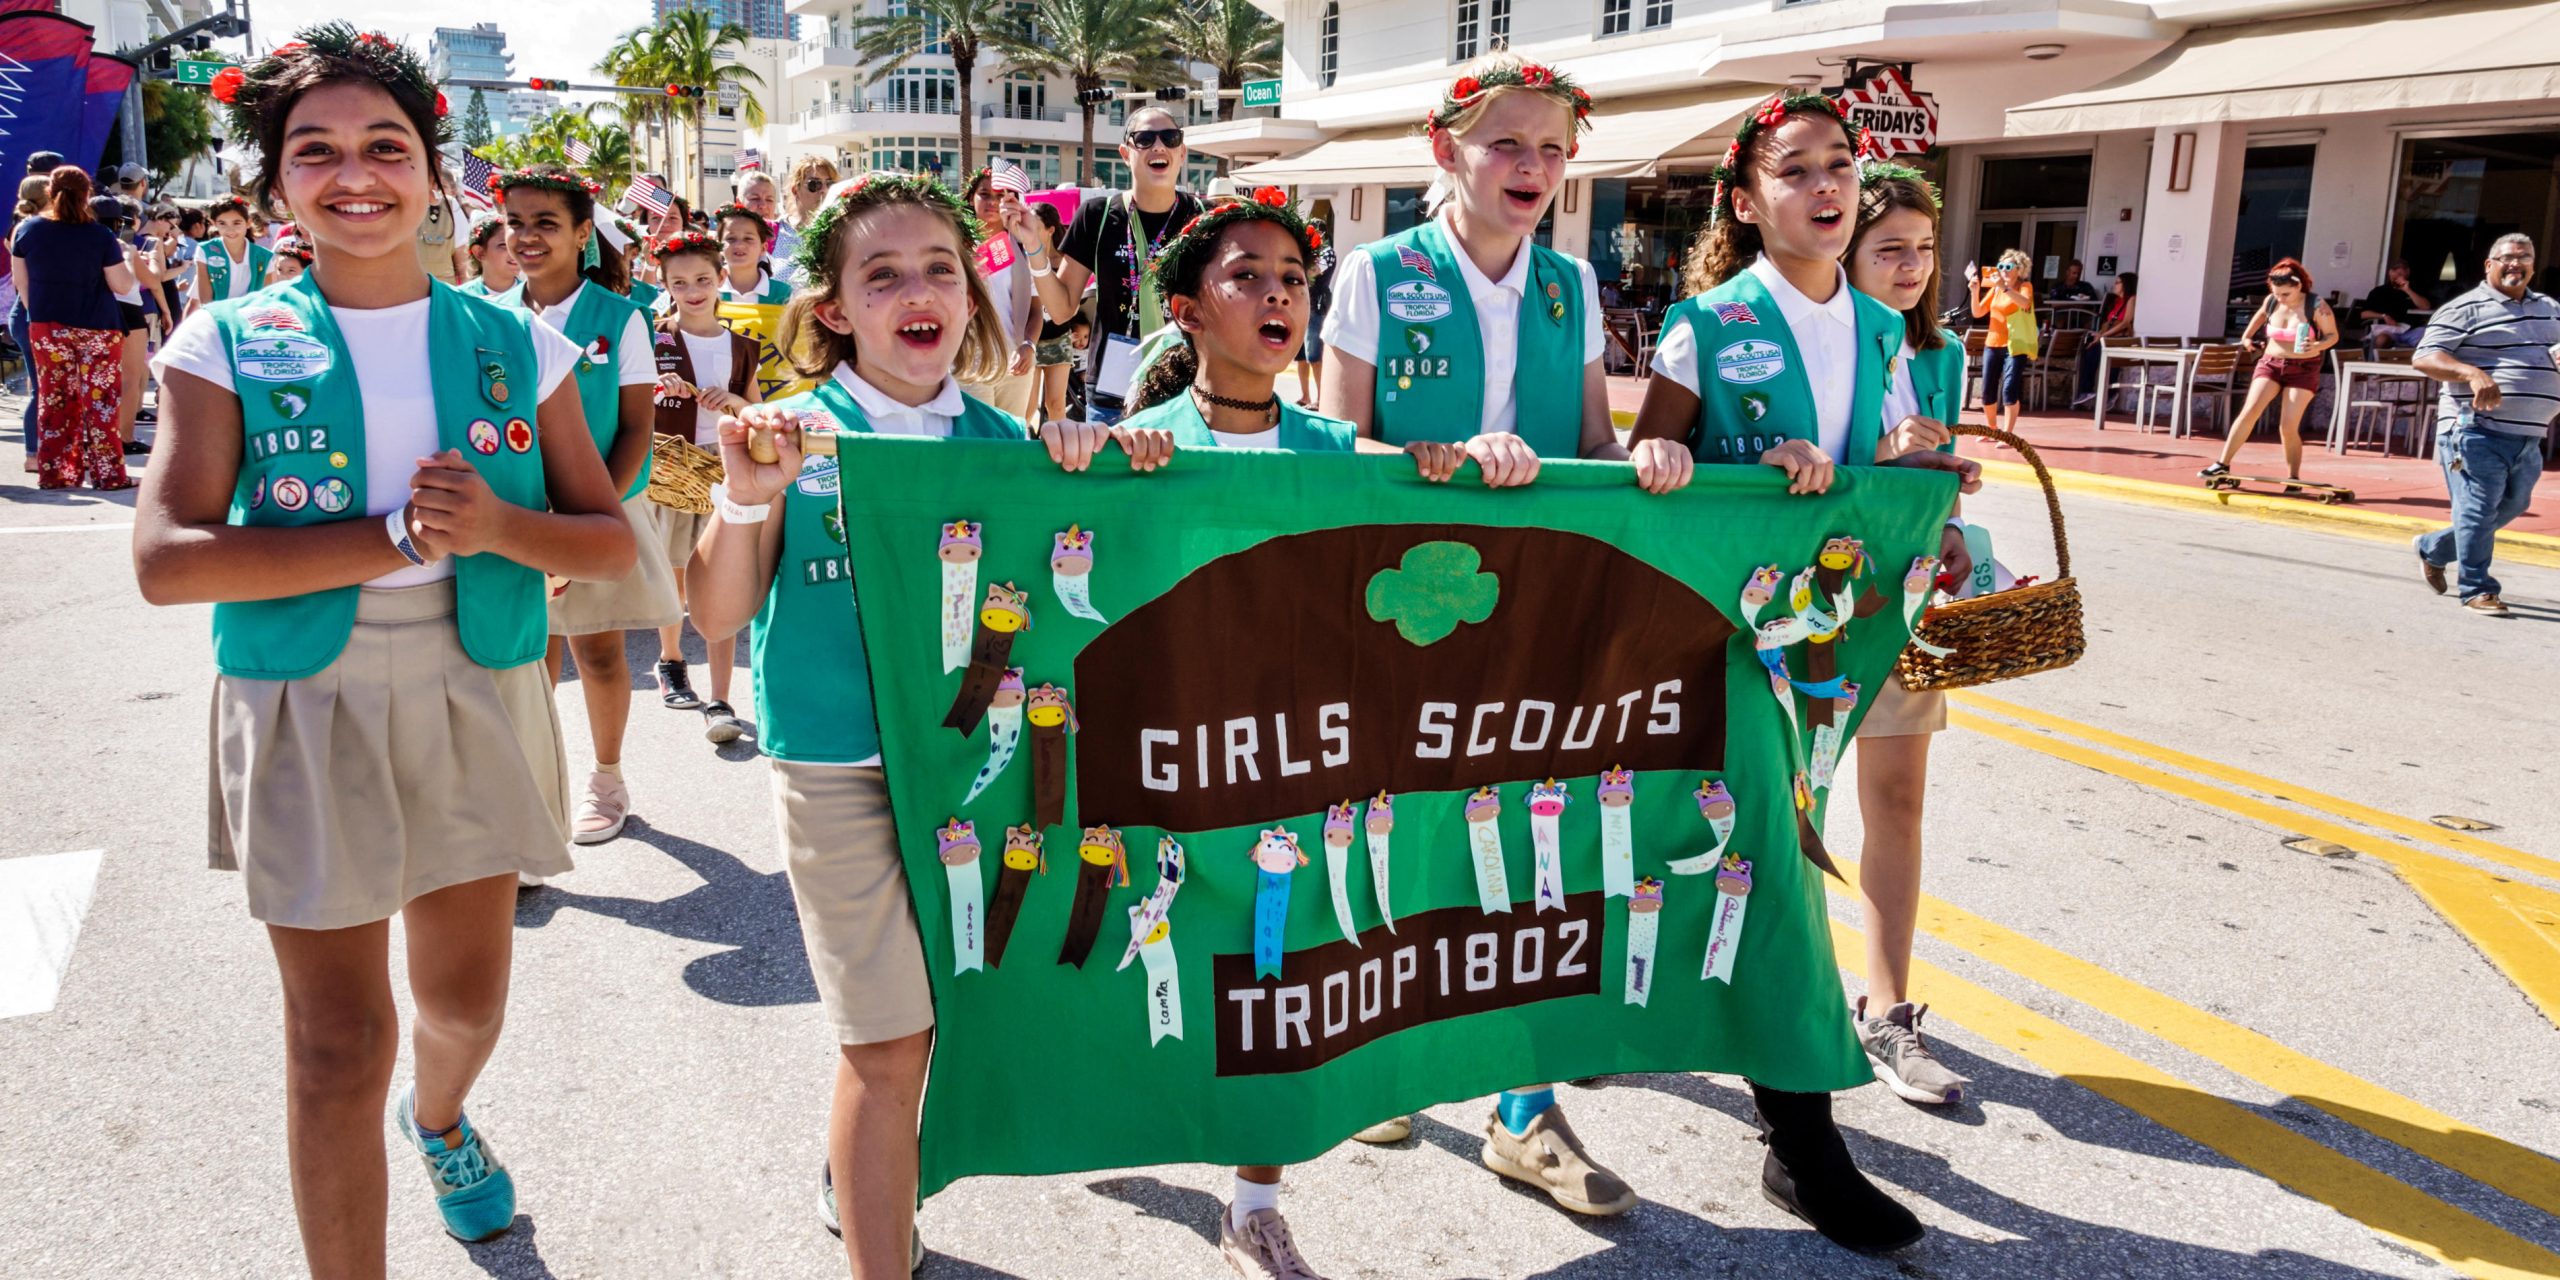 Girl Scouts Parade Patch - 4 Girls